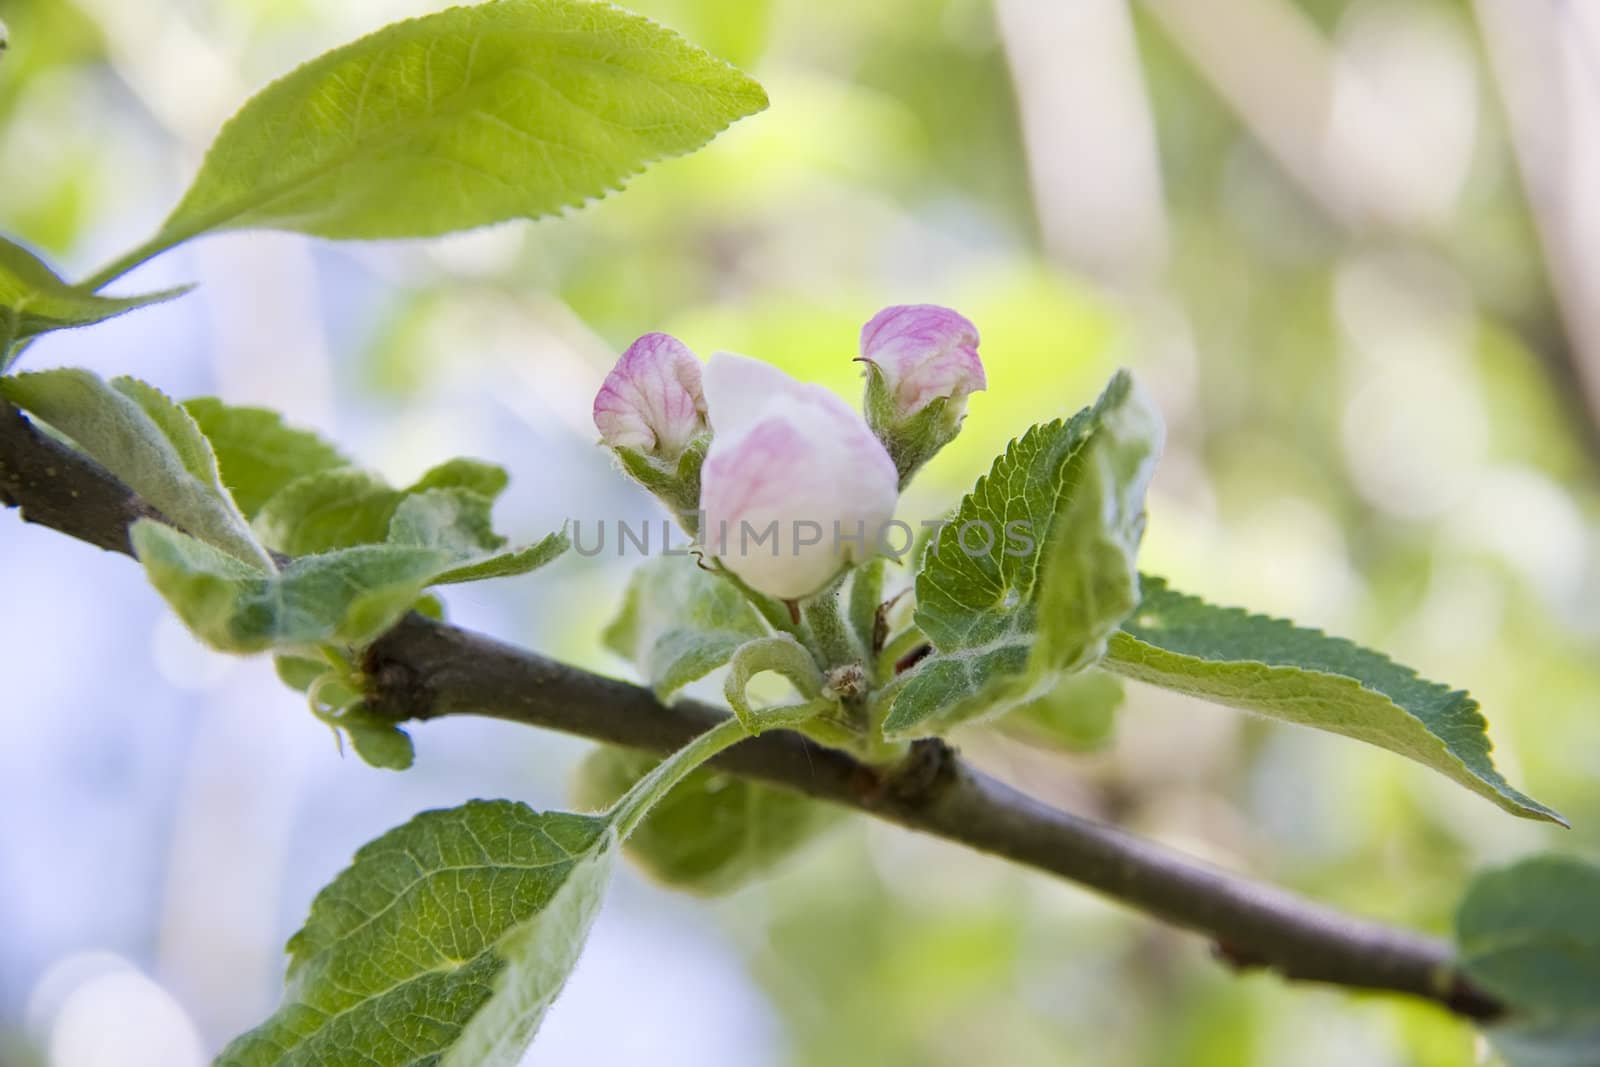 Apple blossom buds by snowturtle